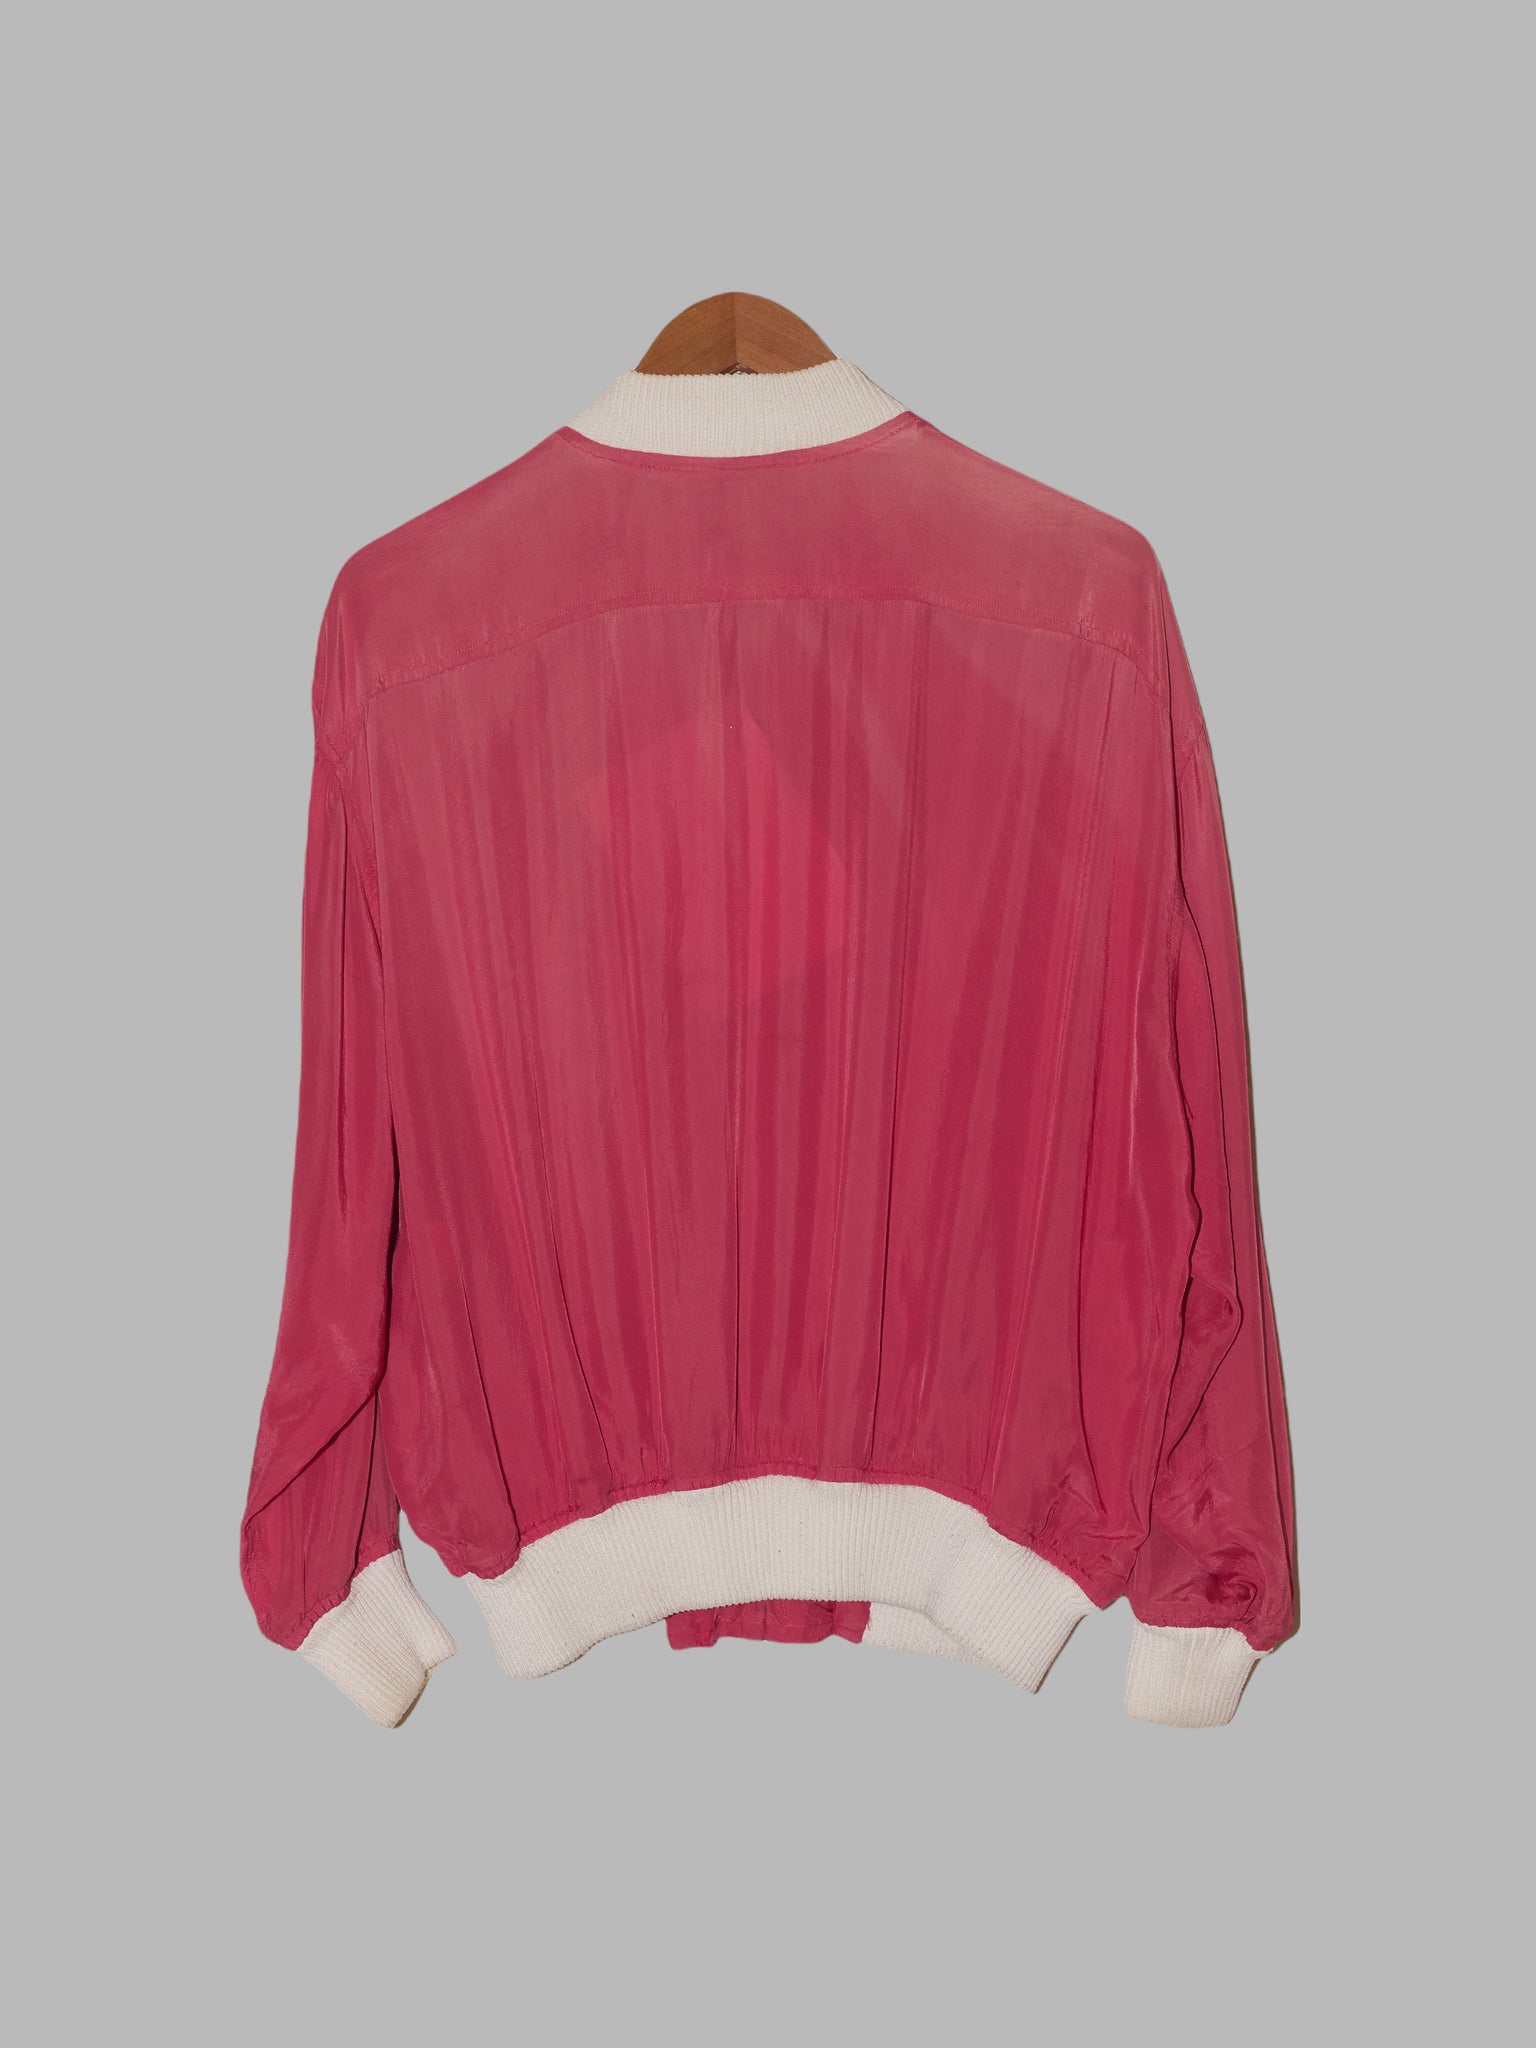 Tricot Comme des Garcons 1980s pink rayon bomber jacket